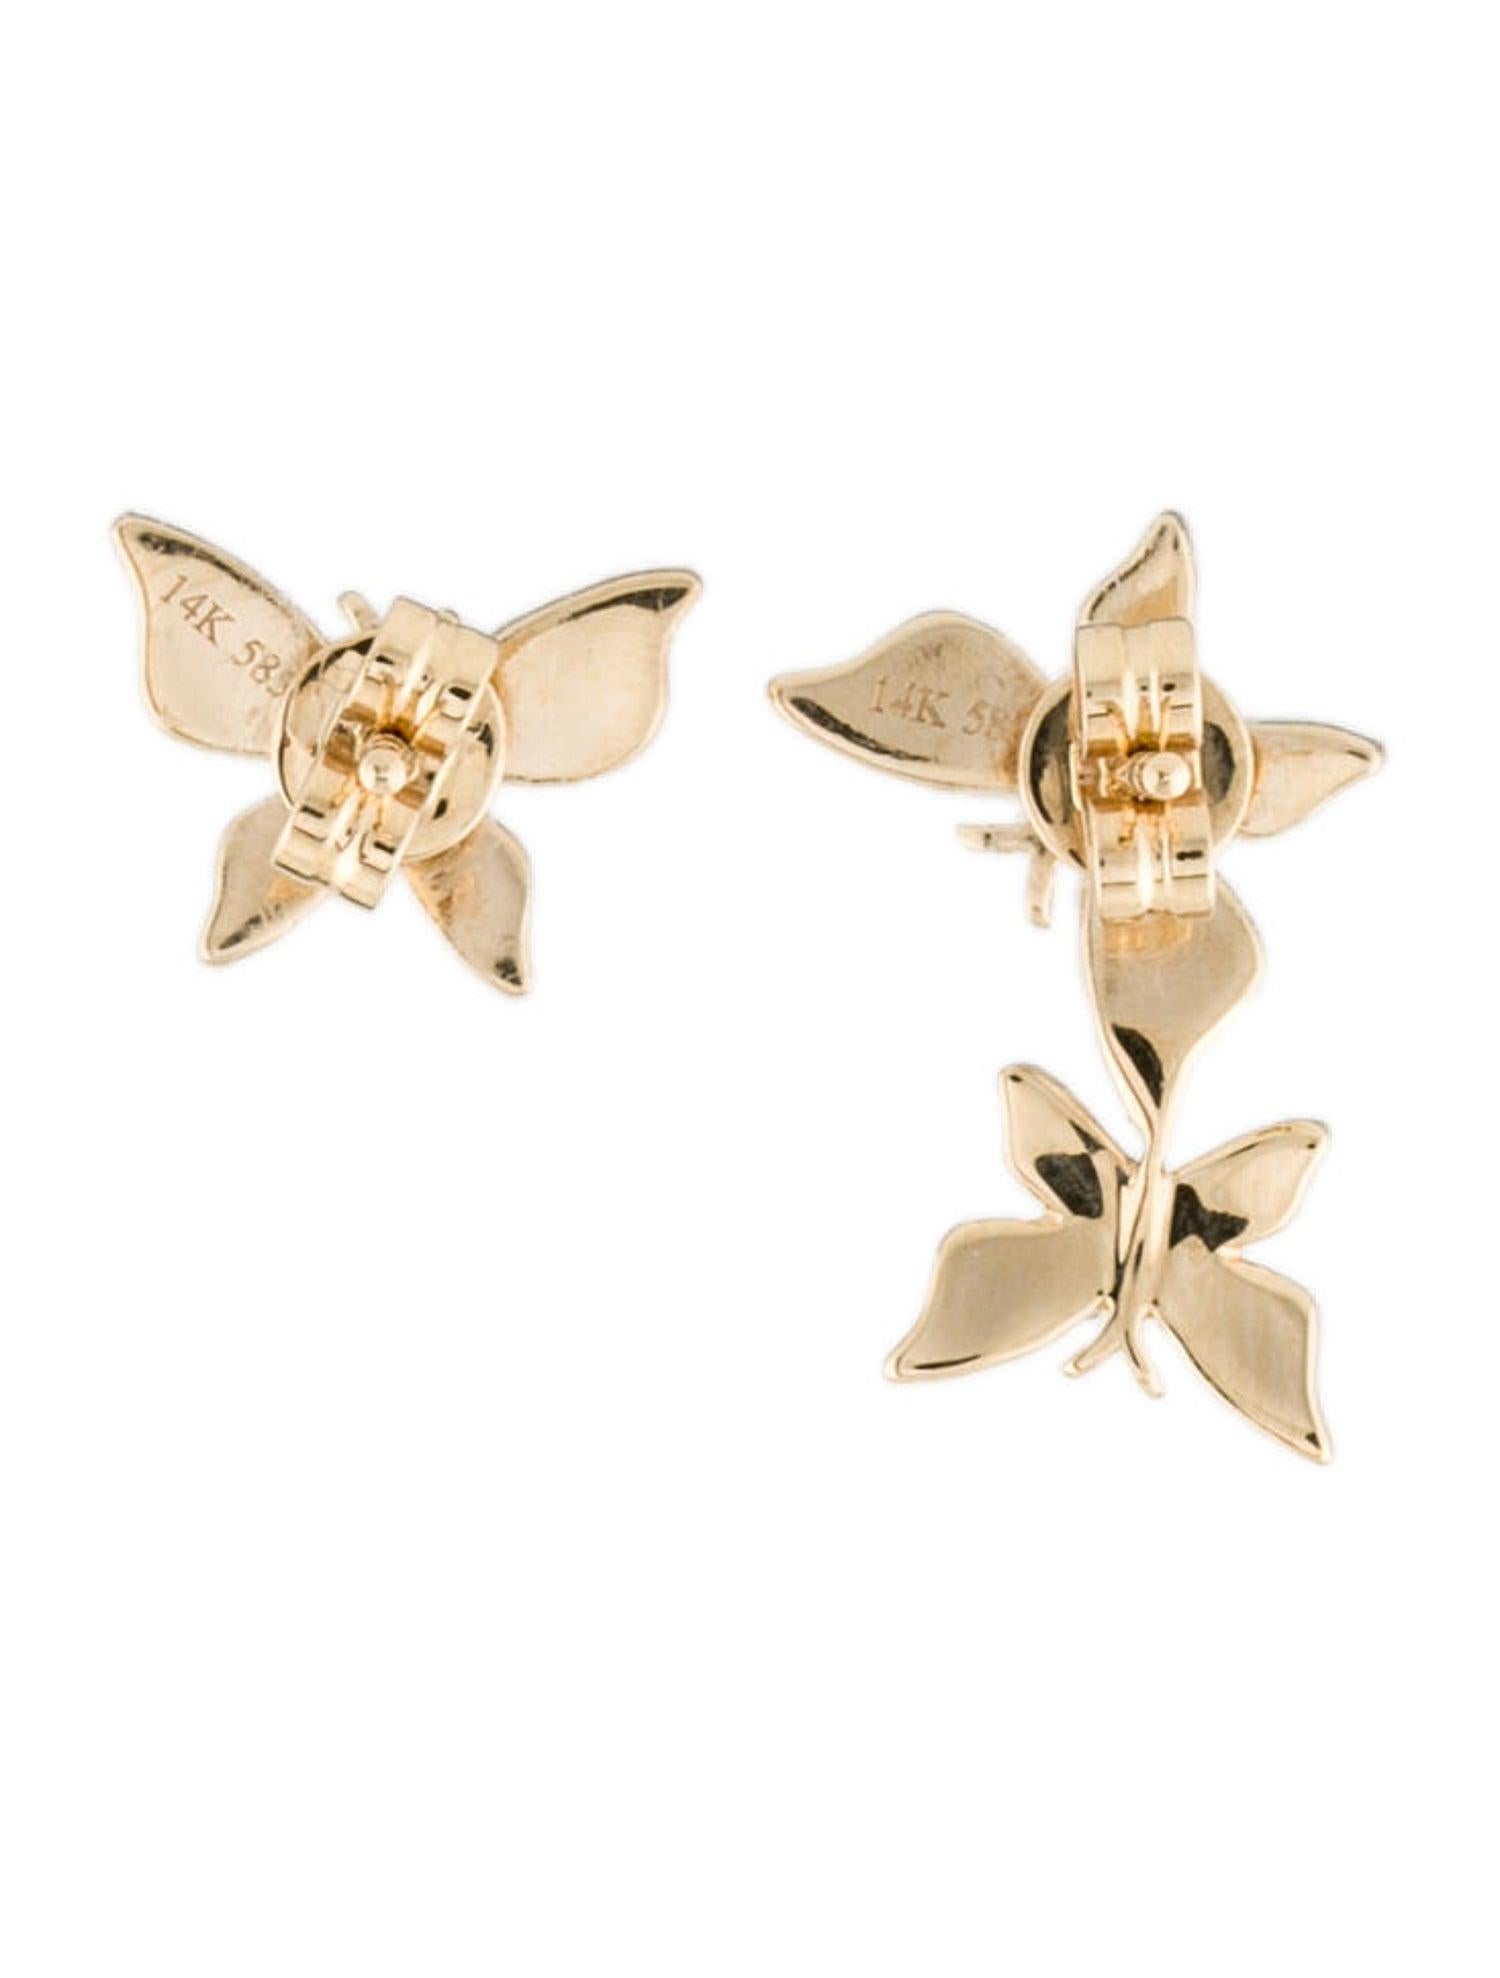 These trendy and sweet Mismatched Butterfly Earrings crafted of 14k gold and round diamonds create an illusion of a second ear piercing although its just an ear climber on one side! Featuring approximately 0.35 ct. of diamonds GH-SI color and